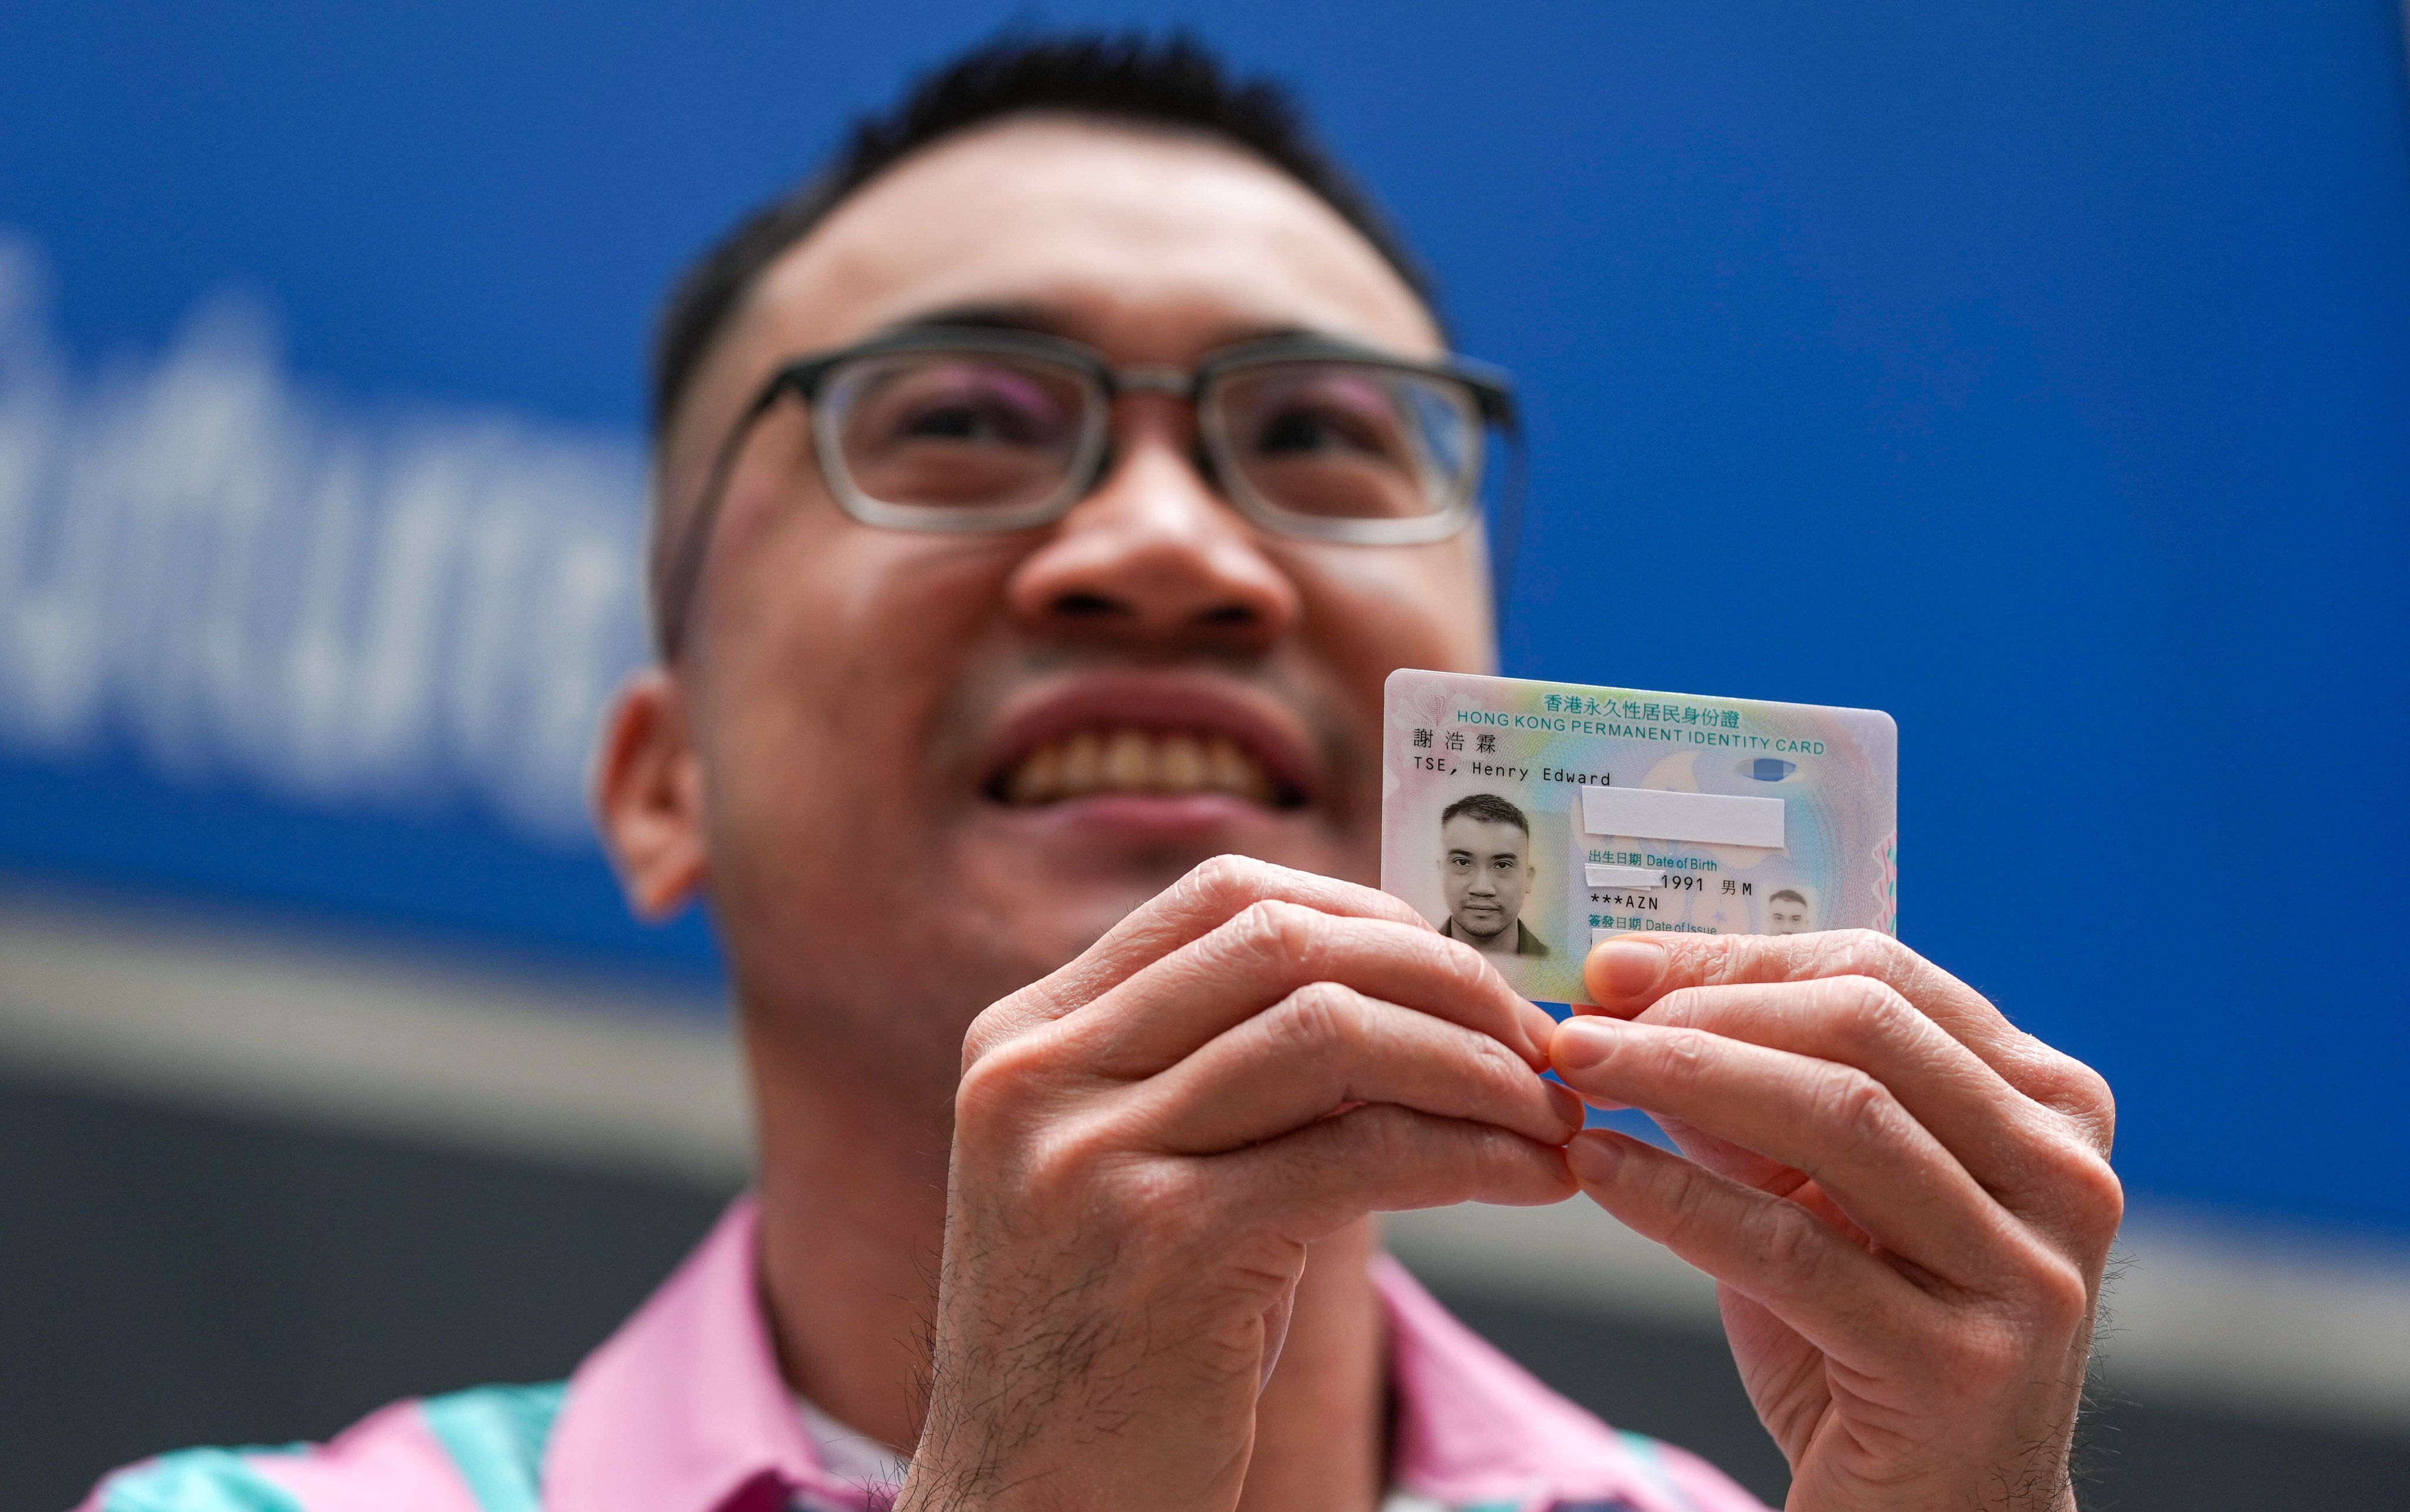 Henry Edward Tse with his new ID card. The transgender activist has vowed to keep up the fight for equality. Photo: Eugene Lee